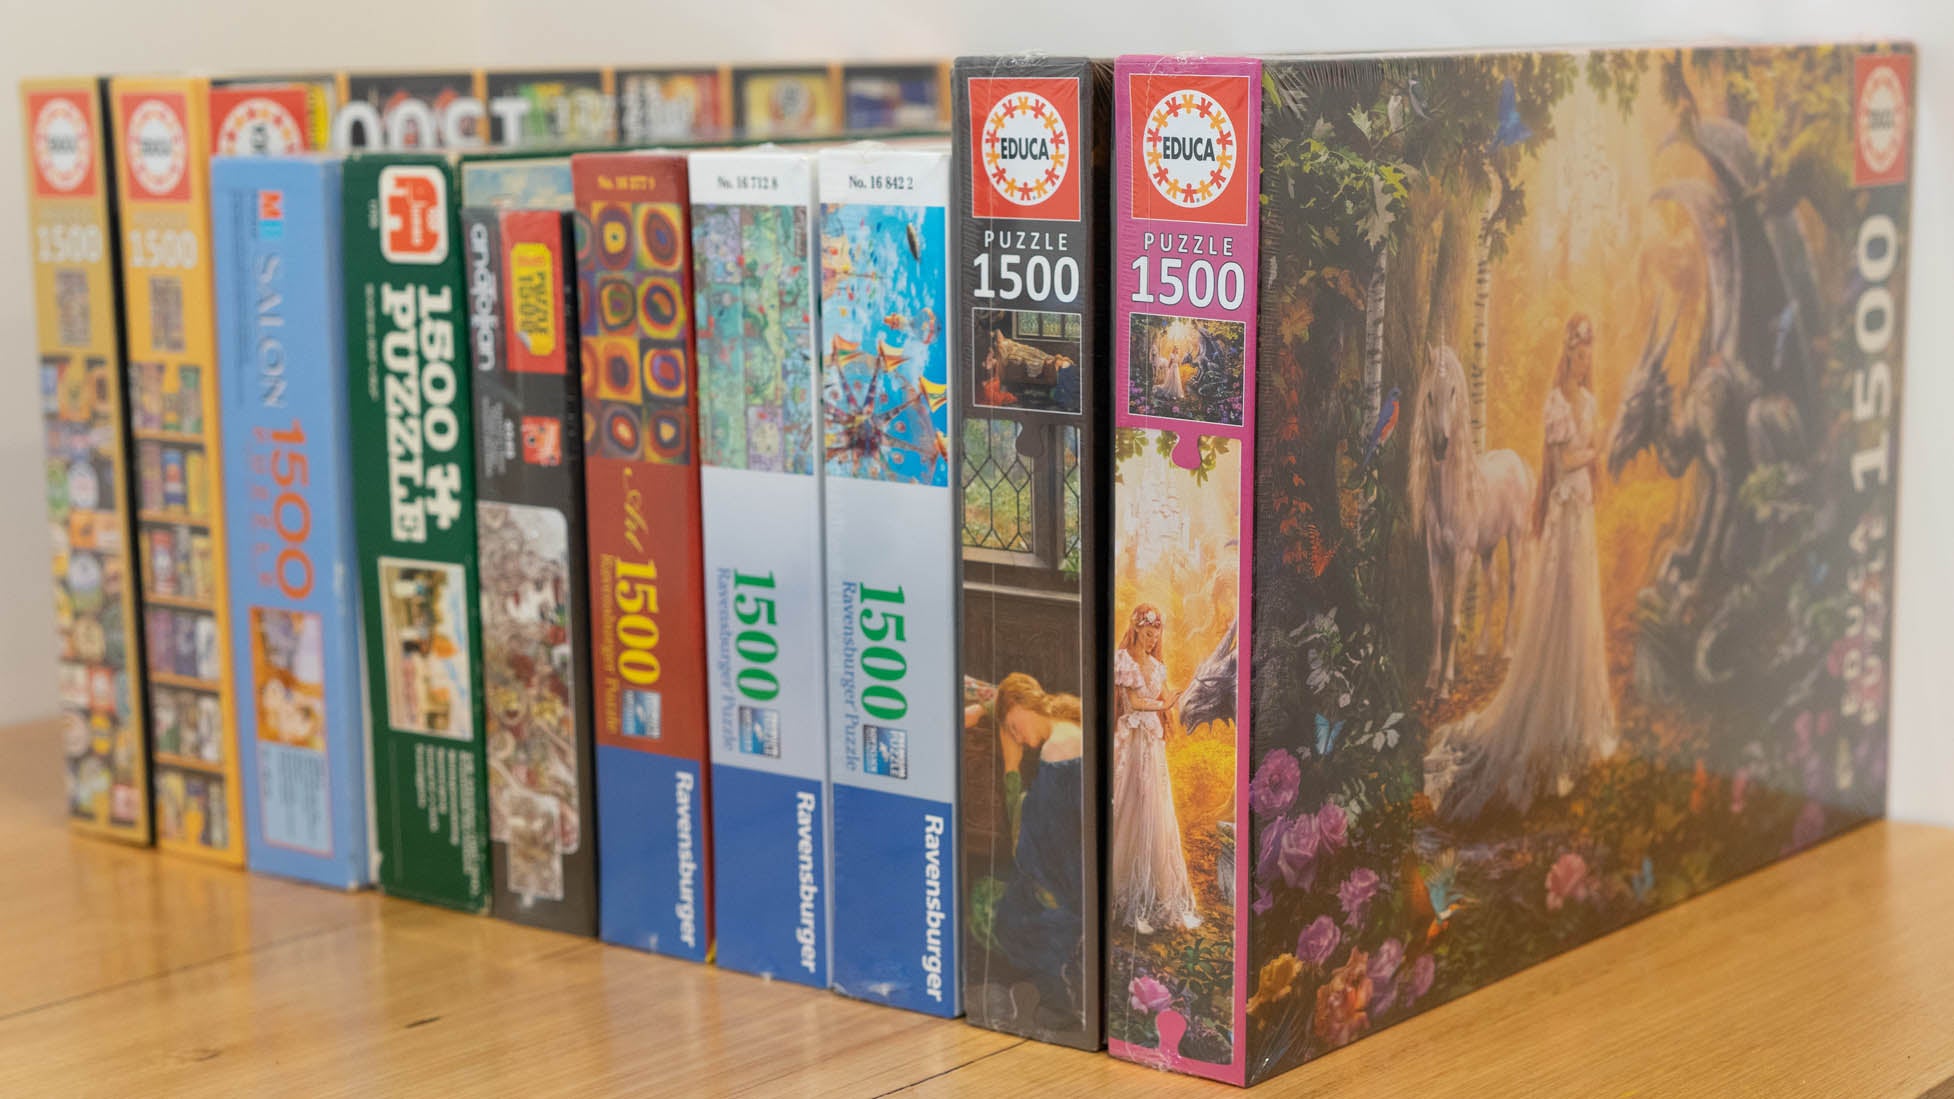  free online jigsaw puzzles 1500 pieces